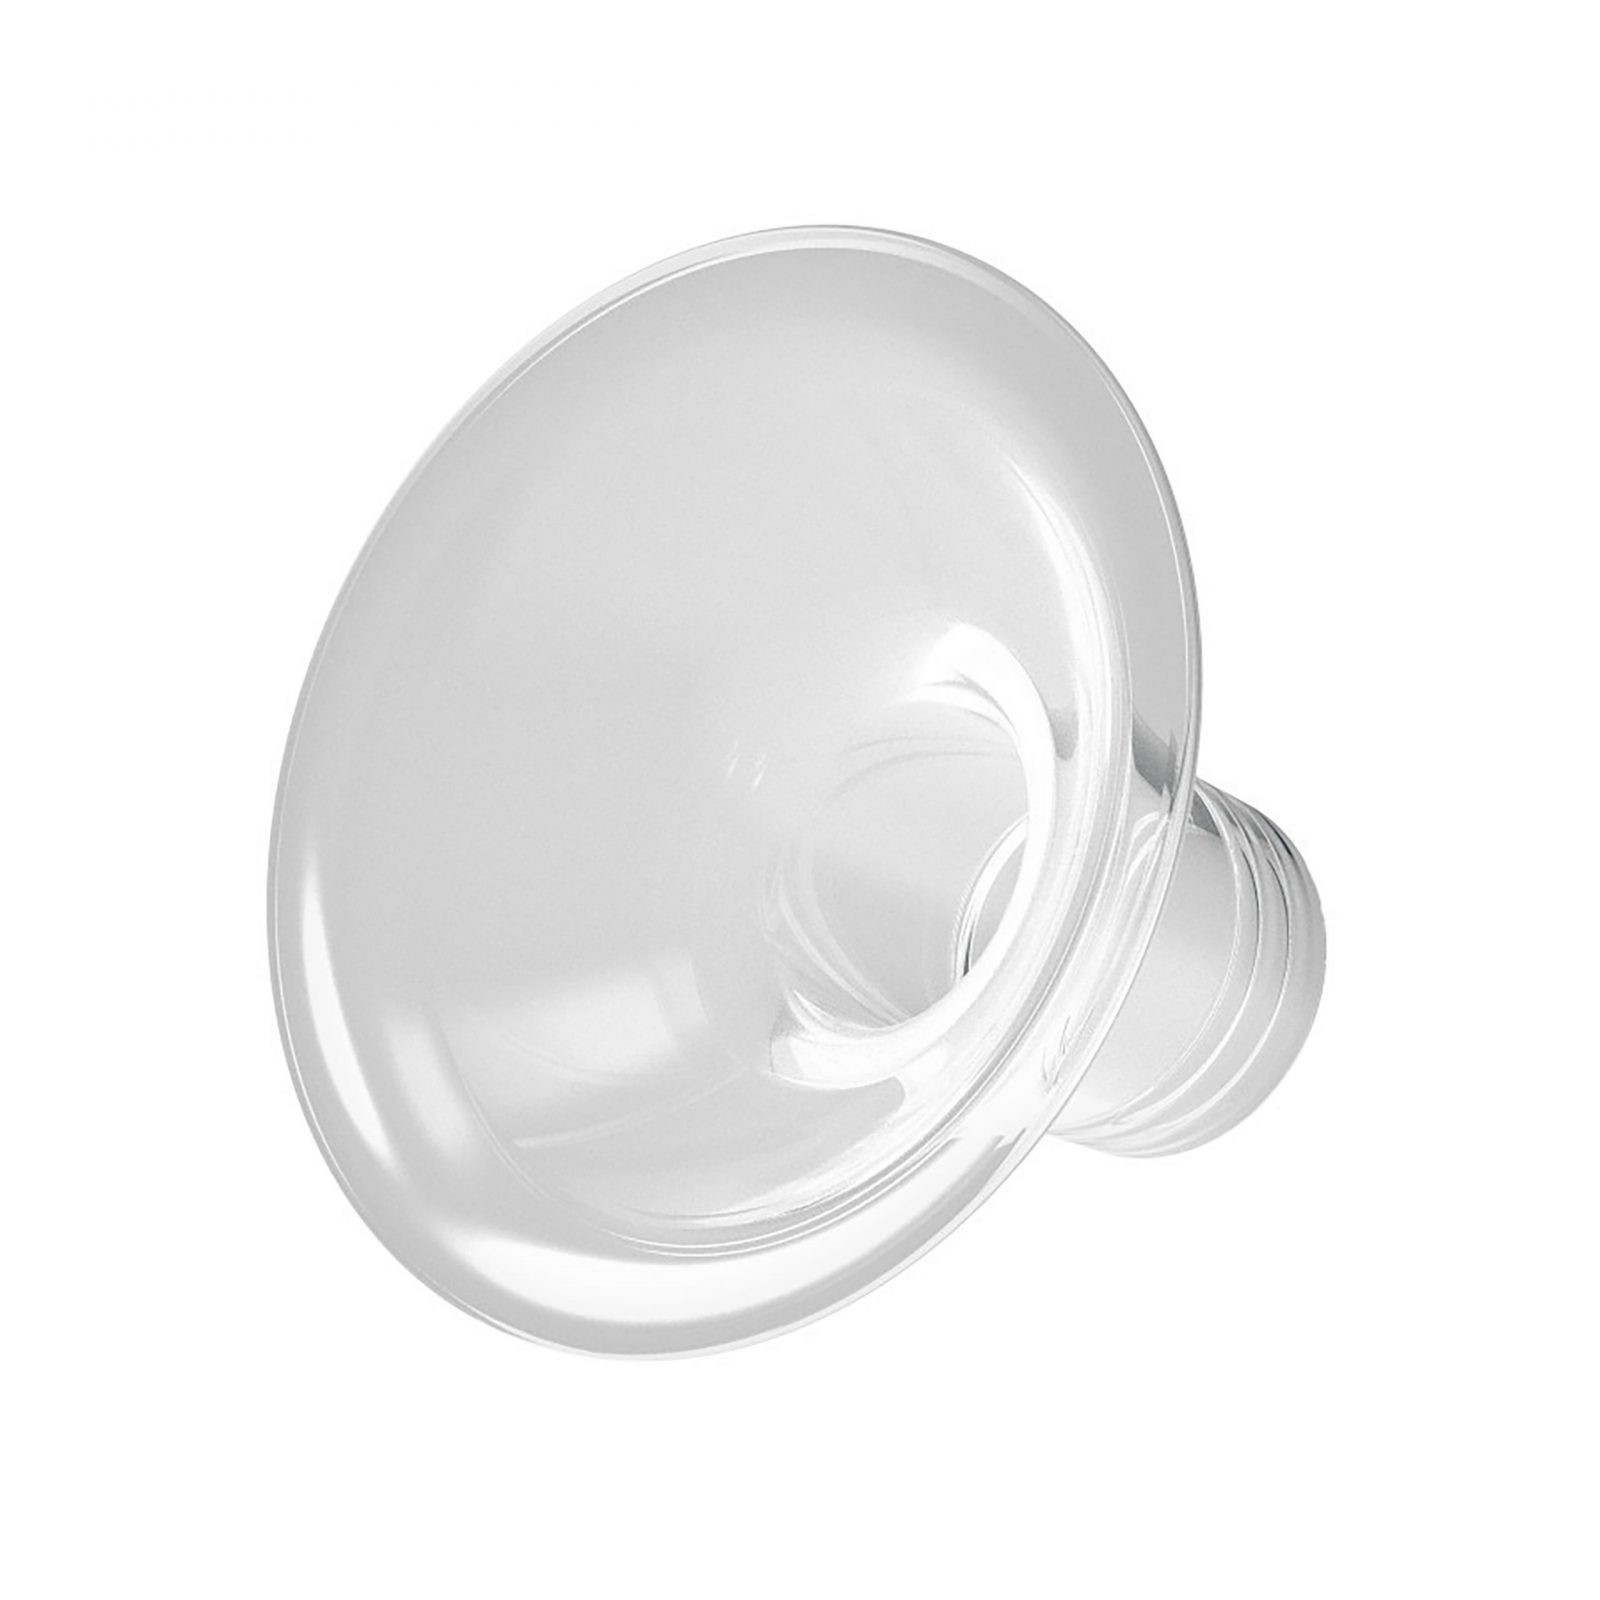 Dr. Brown's™ Manual Breast Pump with SoftShape™ Silicone Shields